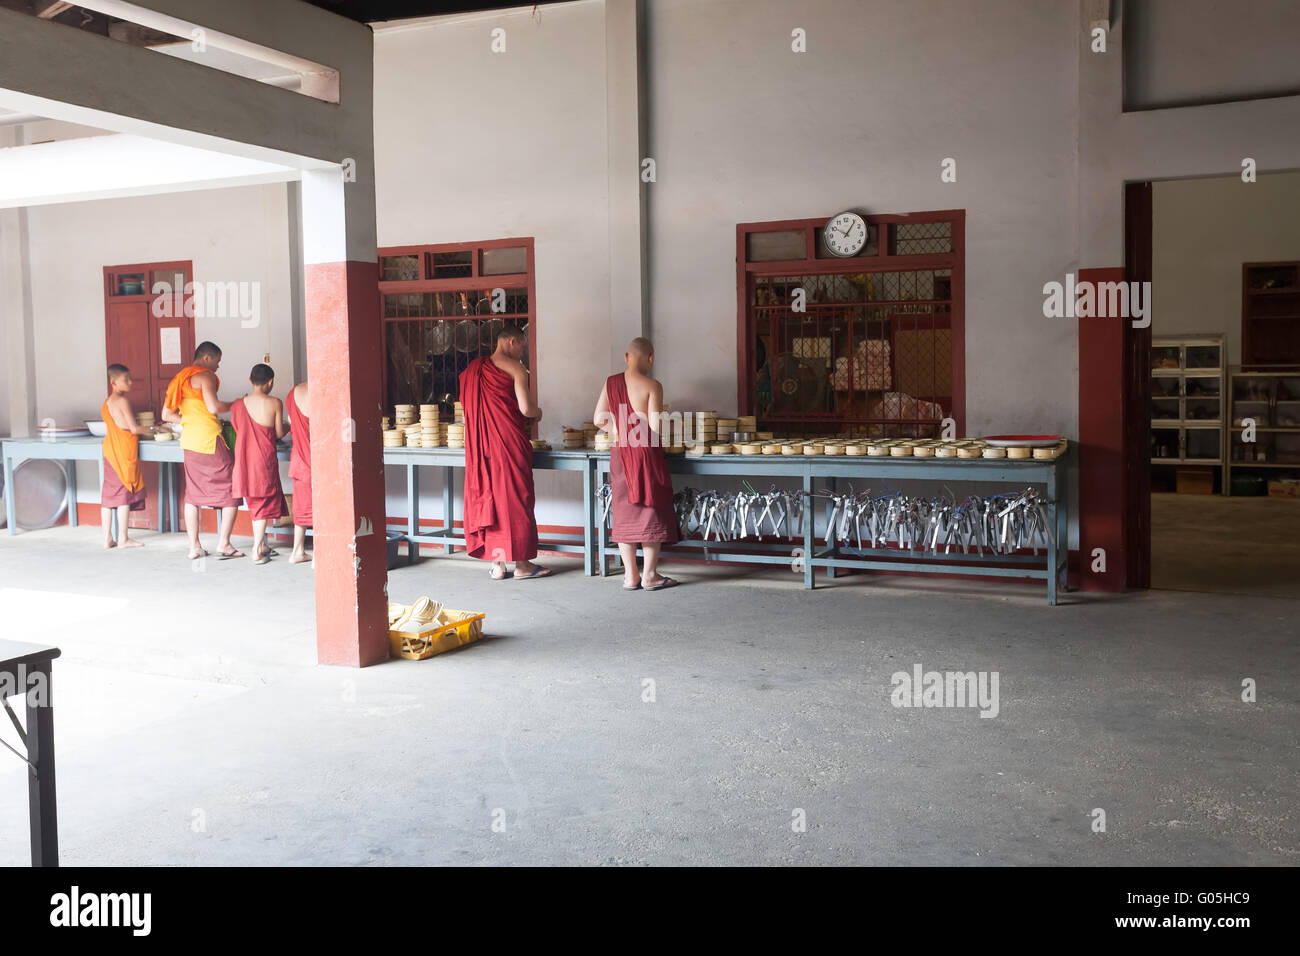 Young monks are trained at WAT JONG KHAM dates back to at least the 13th century - KENGTUNG also known as KYAINGTONG, MYANMAR Stock Photo